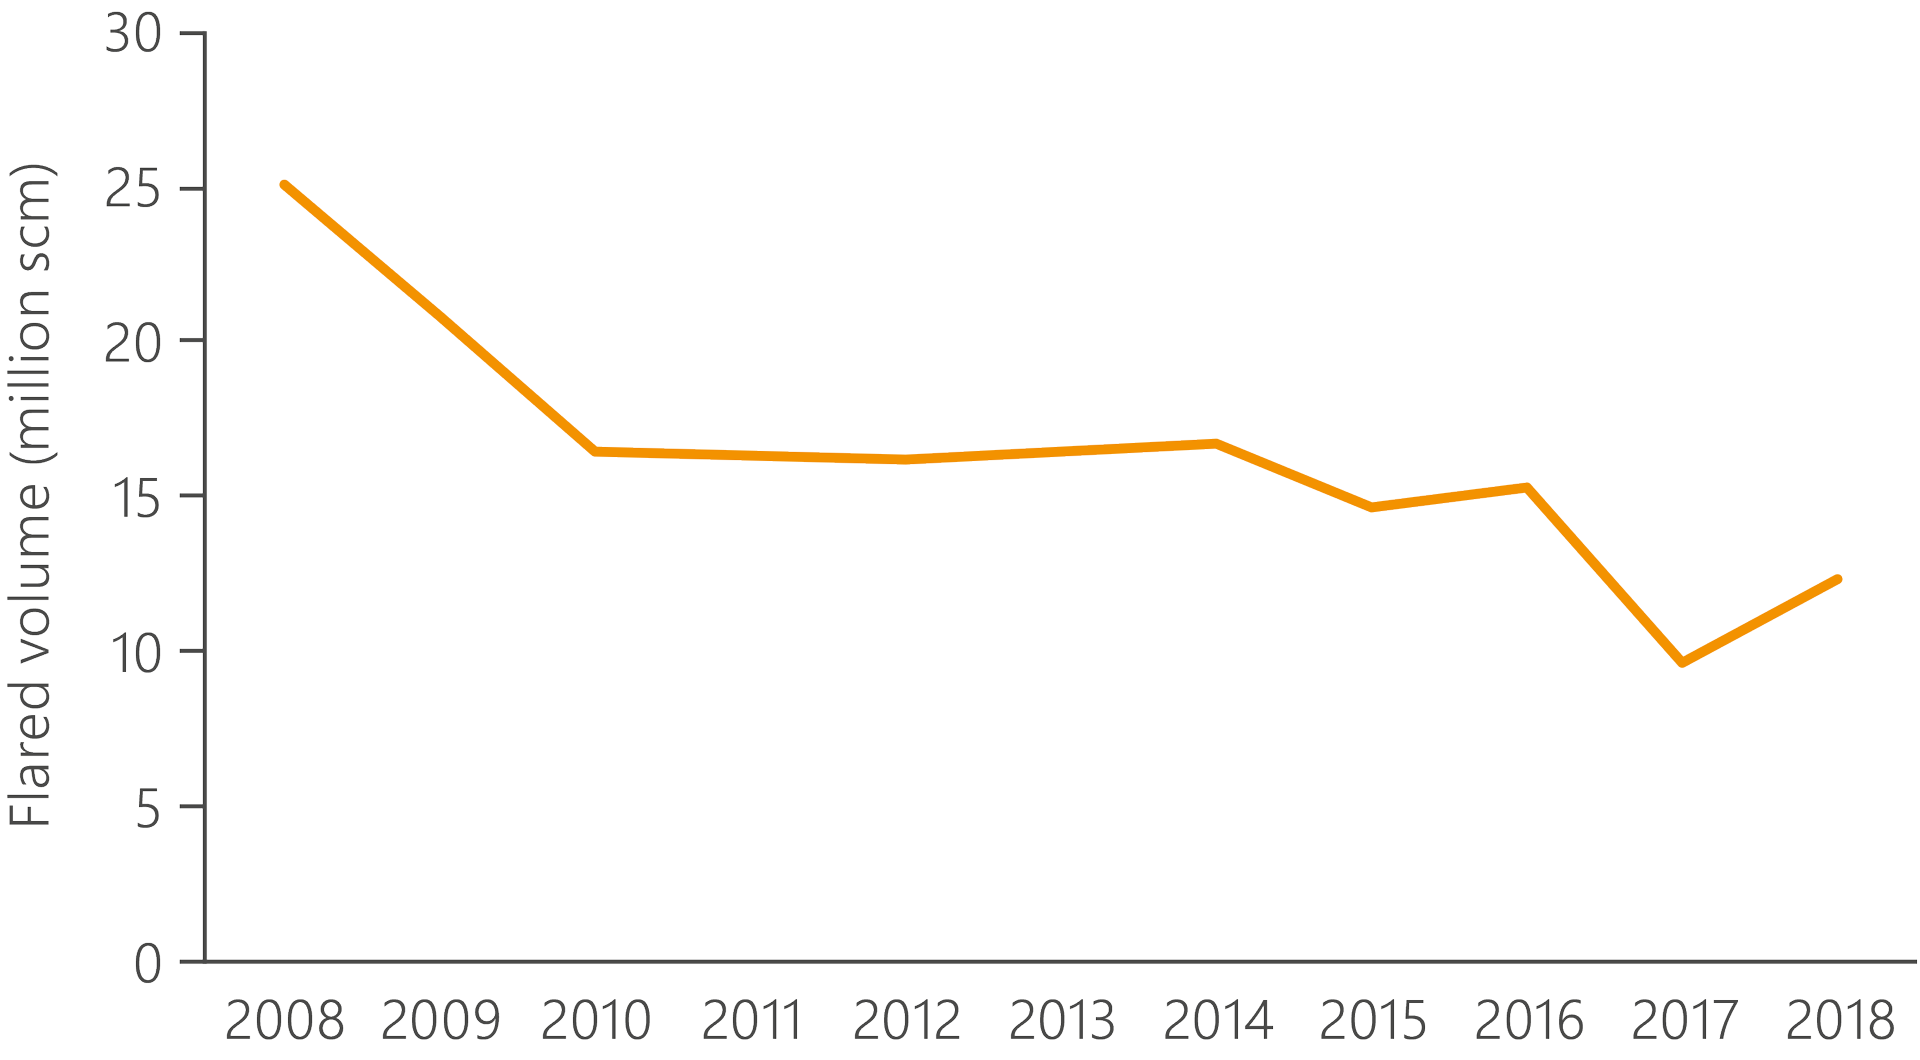 A graph that shows how the quantity of gas flared on fields in the Ekofisk area has changed from 2008 to 2018